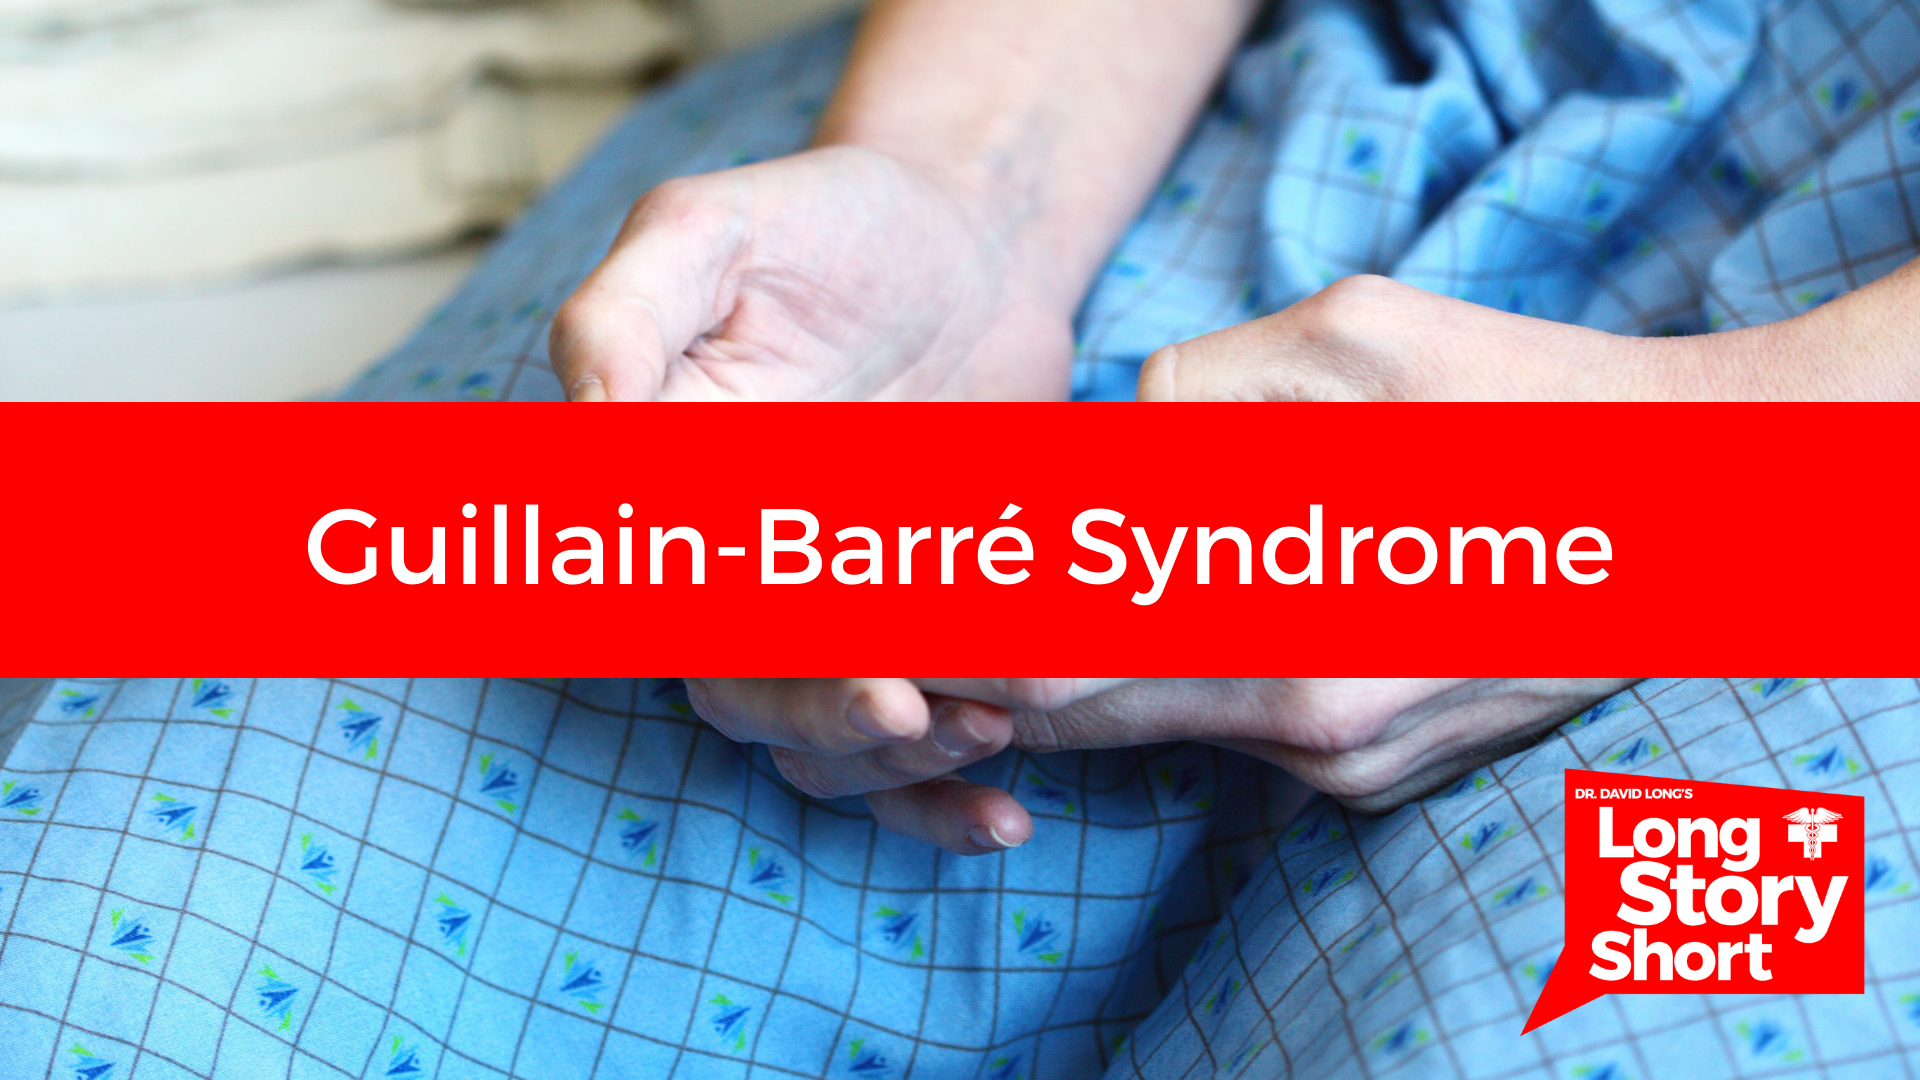 You are currently viewing Guillain-Barré Syndrome – Dr. David Long